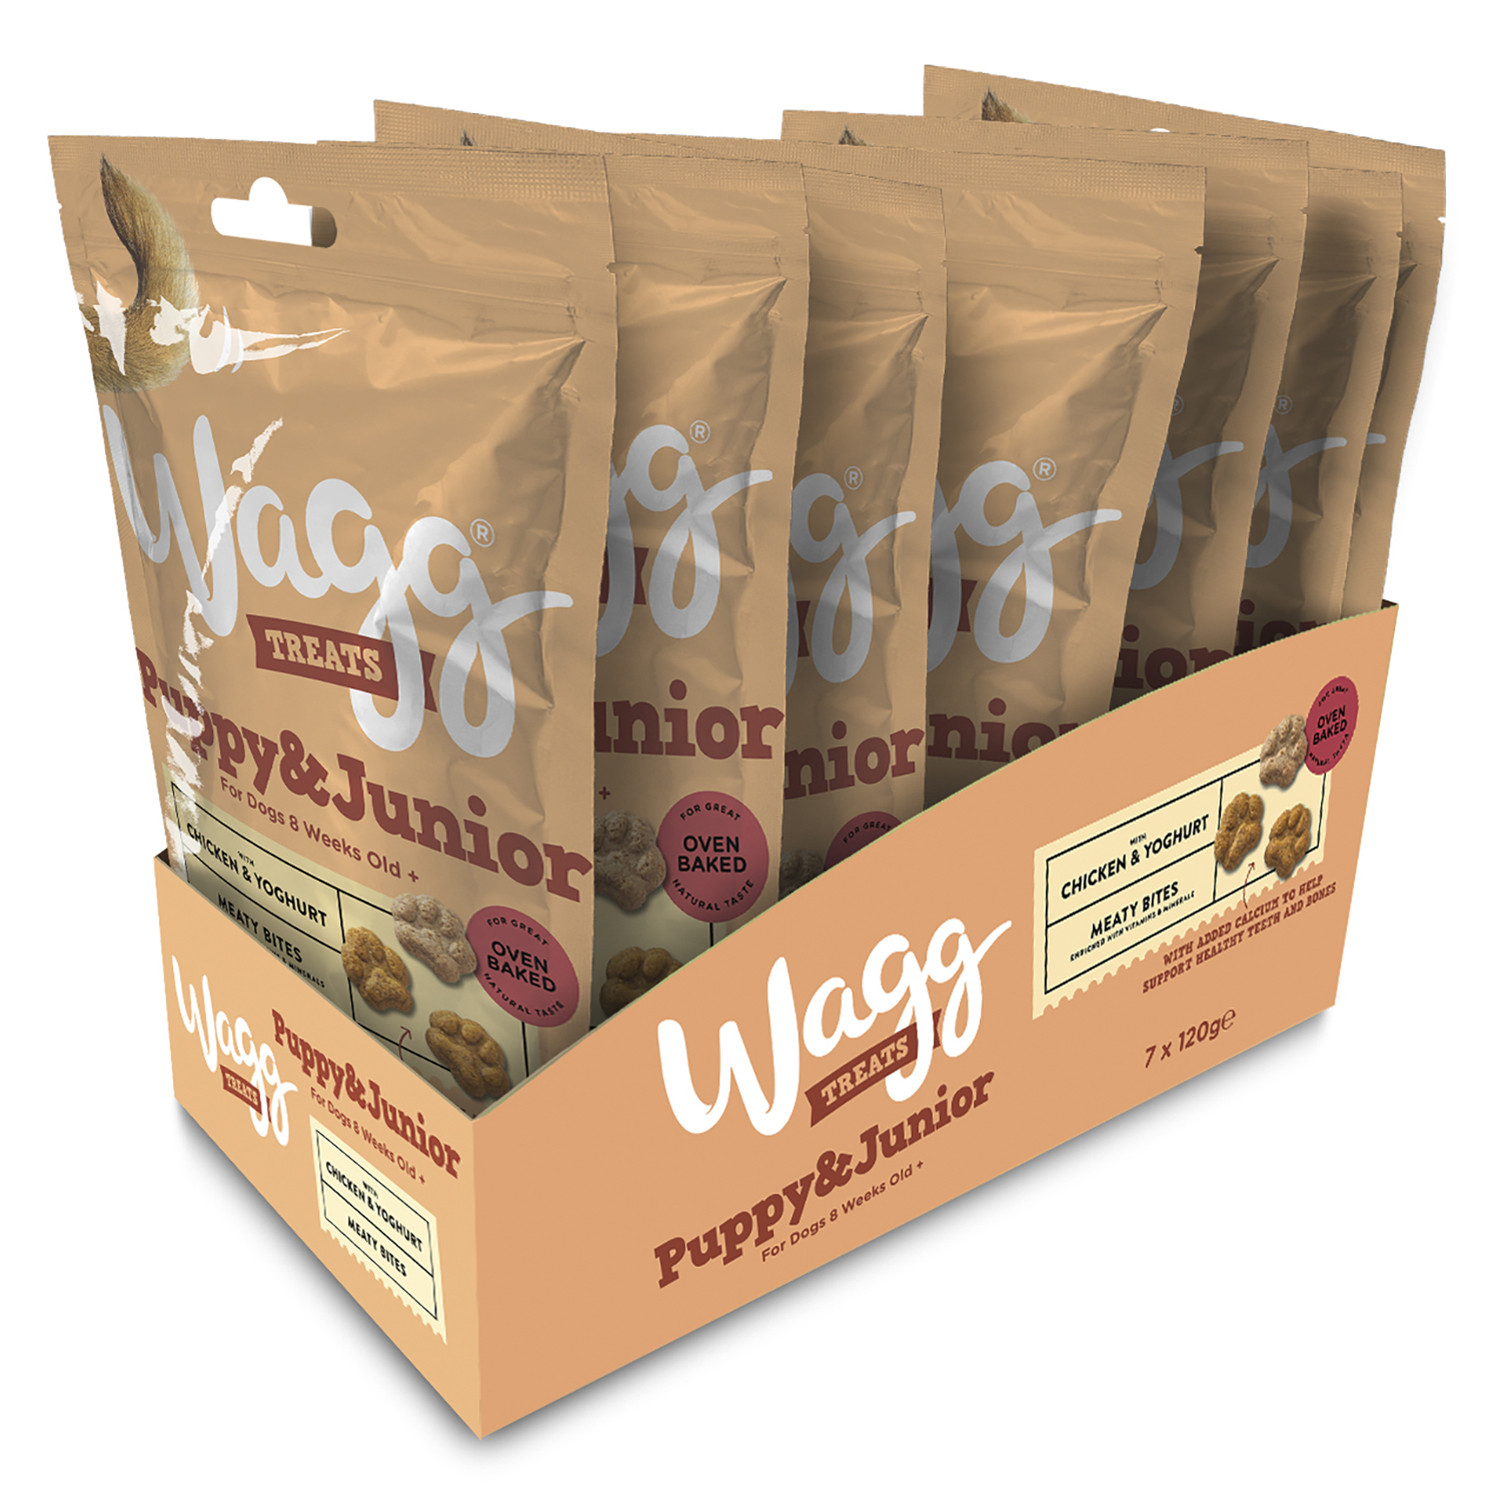 Wagg Chicken and Yoghurt Puppy and Junior Dog Treat 120g Image